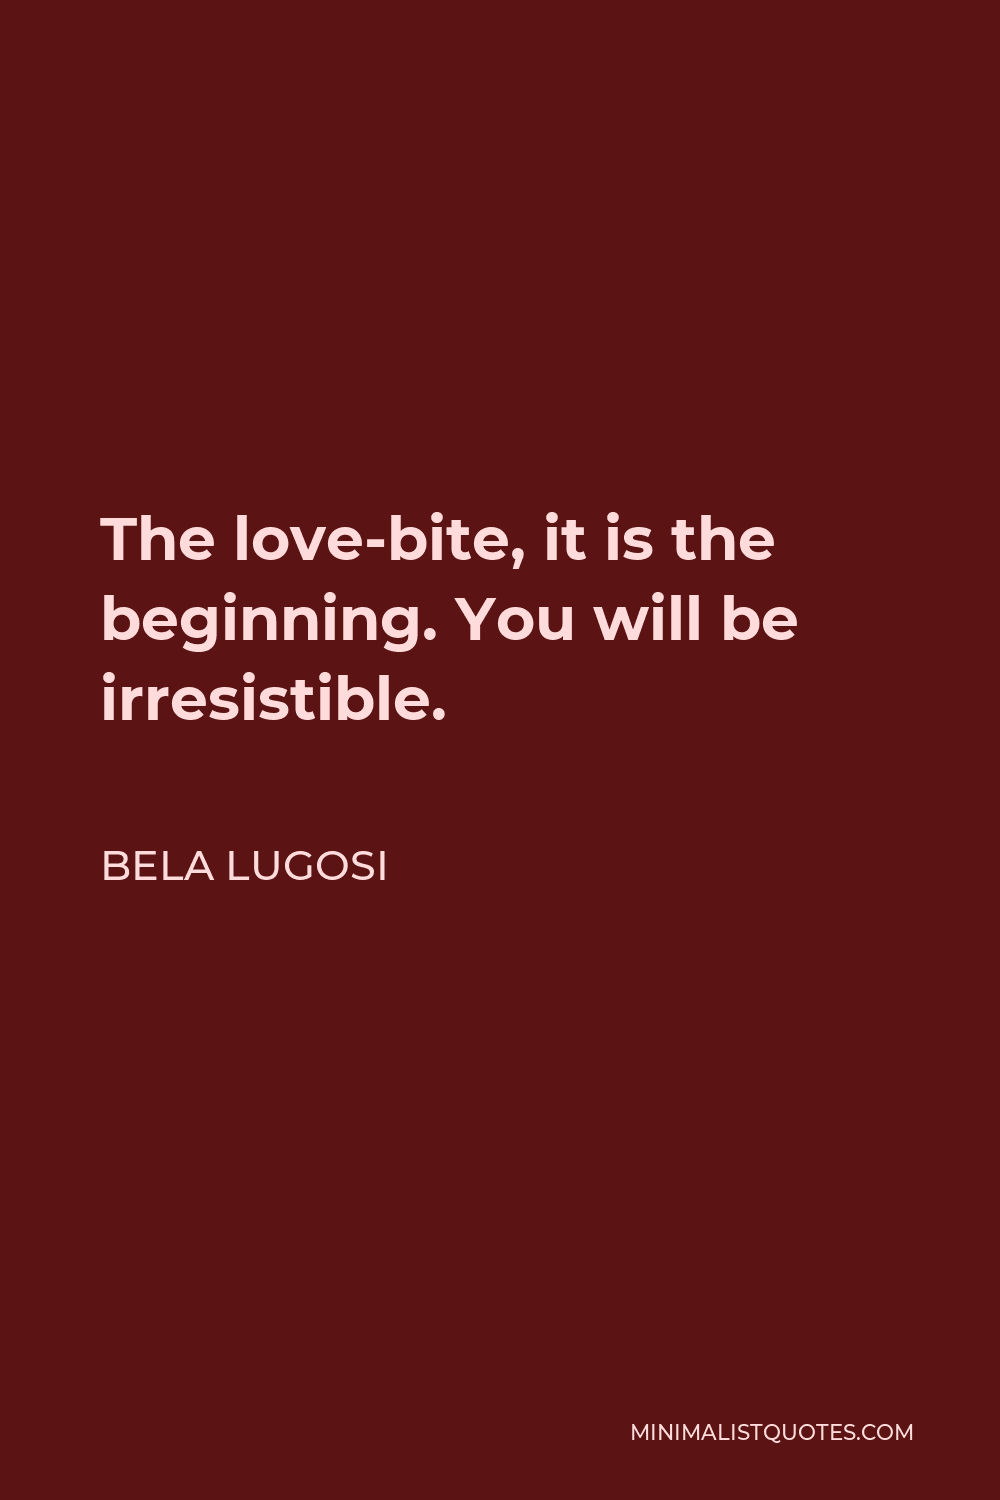 Bela Lugosi Quote - The love-bite, it is the beginning. You will be irresistible.